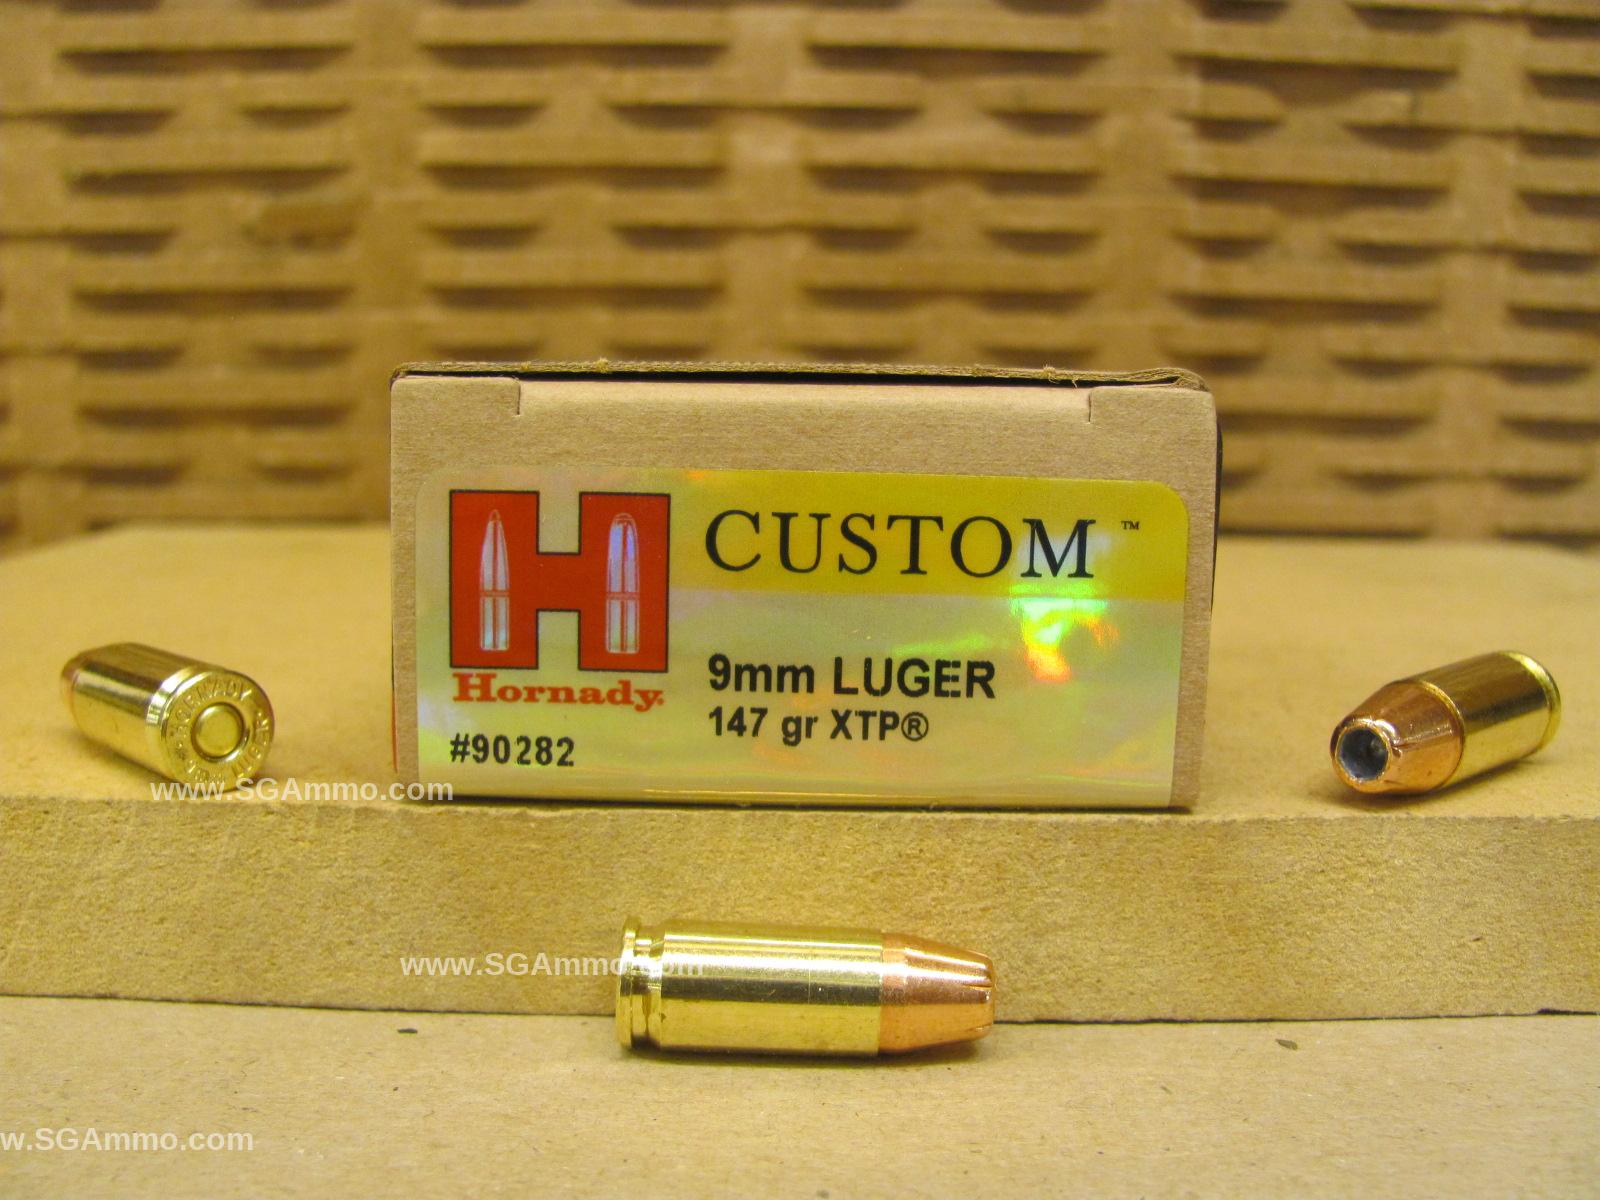 250 Round Case - 9mm Luger 147 Grain XTP Hollow Point Ammo by Hornady - 90282